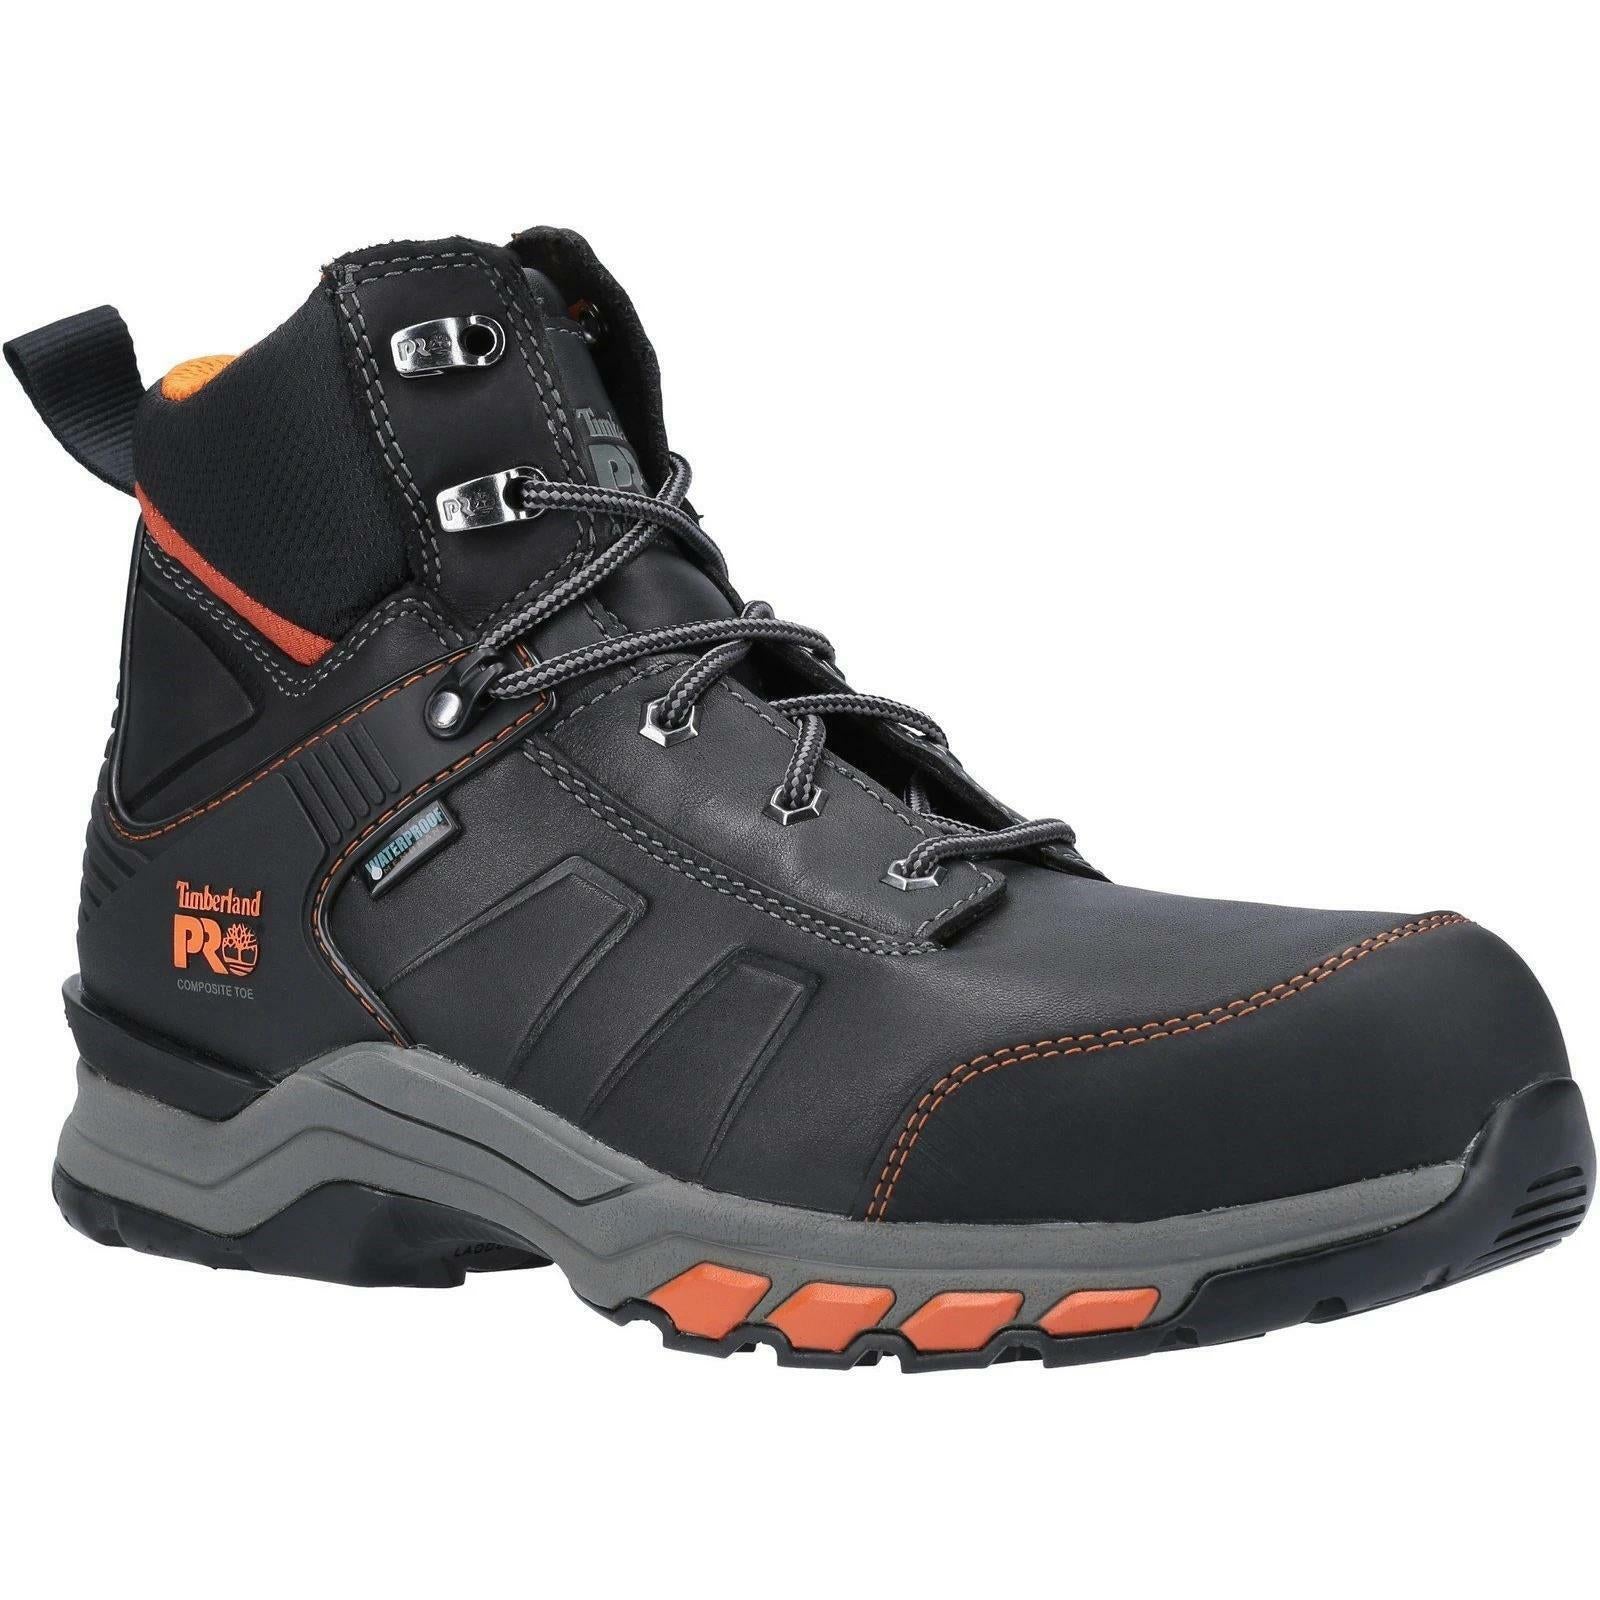 Timberland Hypercharge S3 black/orange composite toe/midsole work safety boot